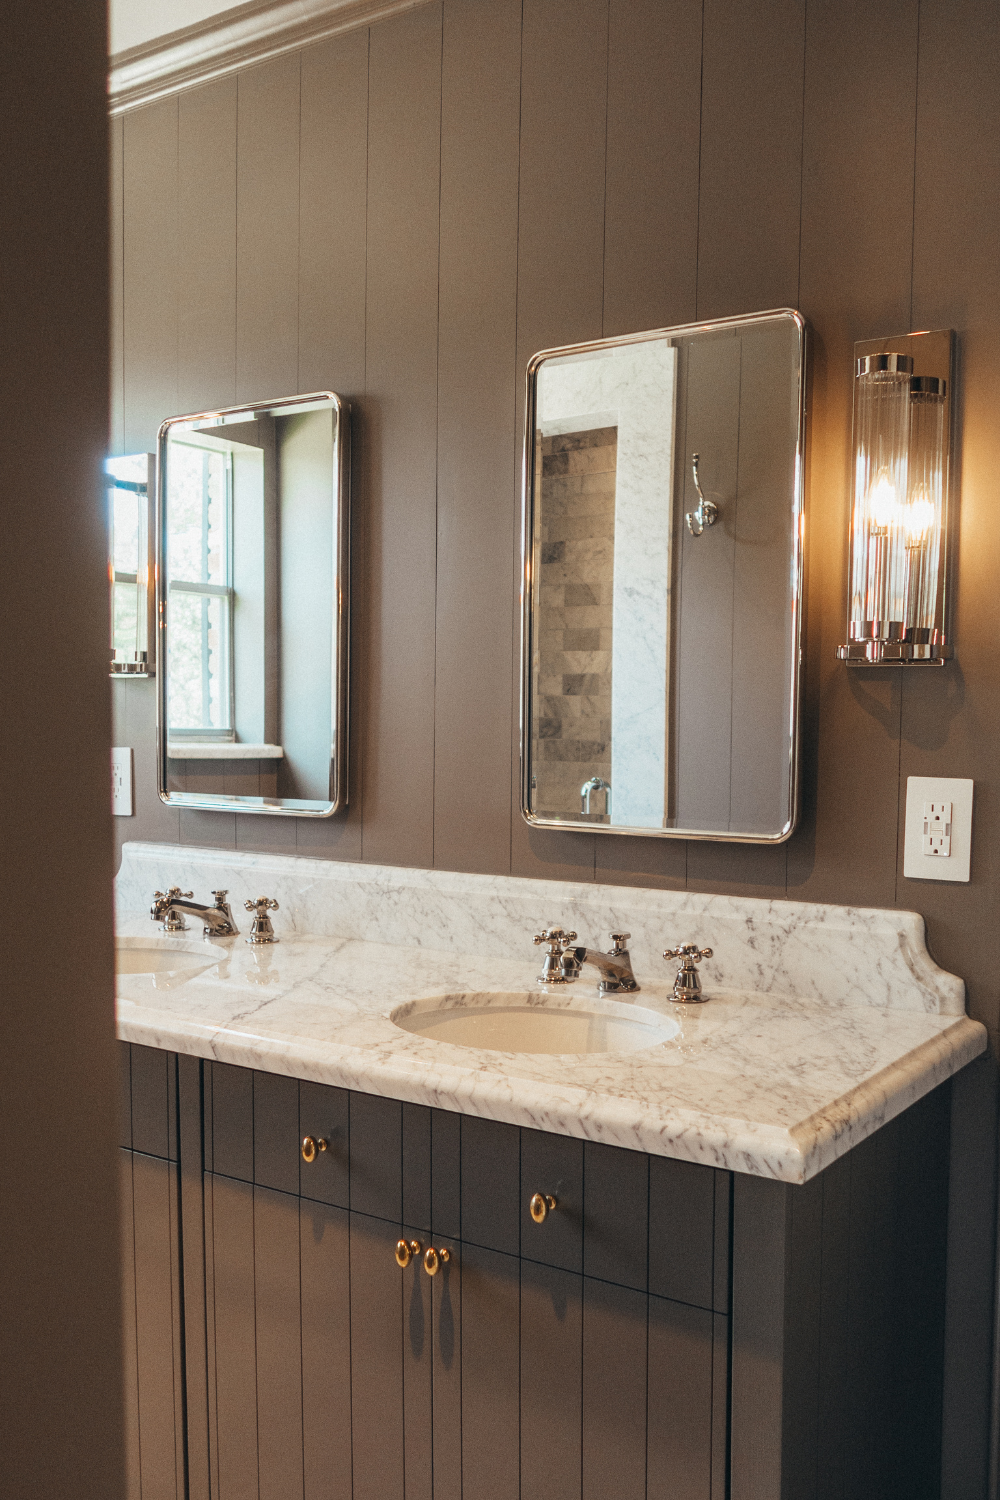 timeless bathroom, cottage core, brown bathroom, bathroom remodel ideas, Sophisticated bathroom retreat with timeless finishes and lighting, interior designer houston, interior design